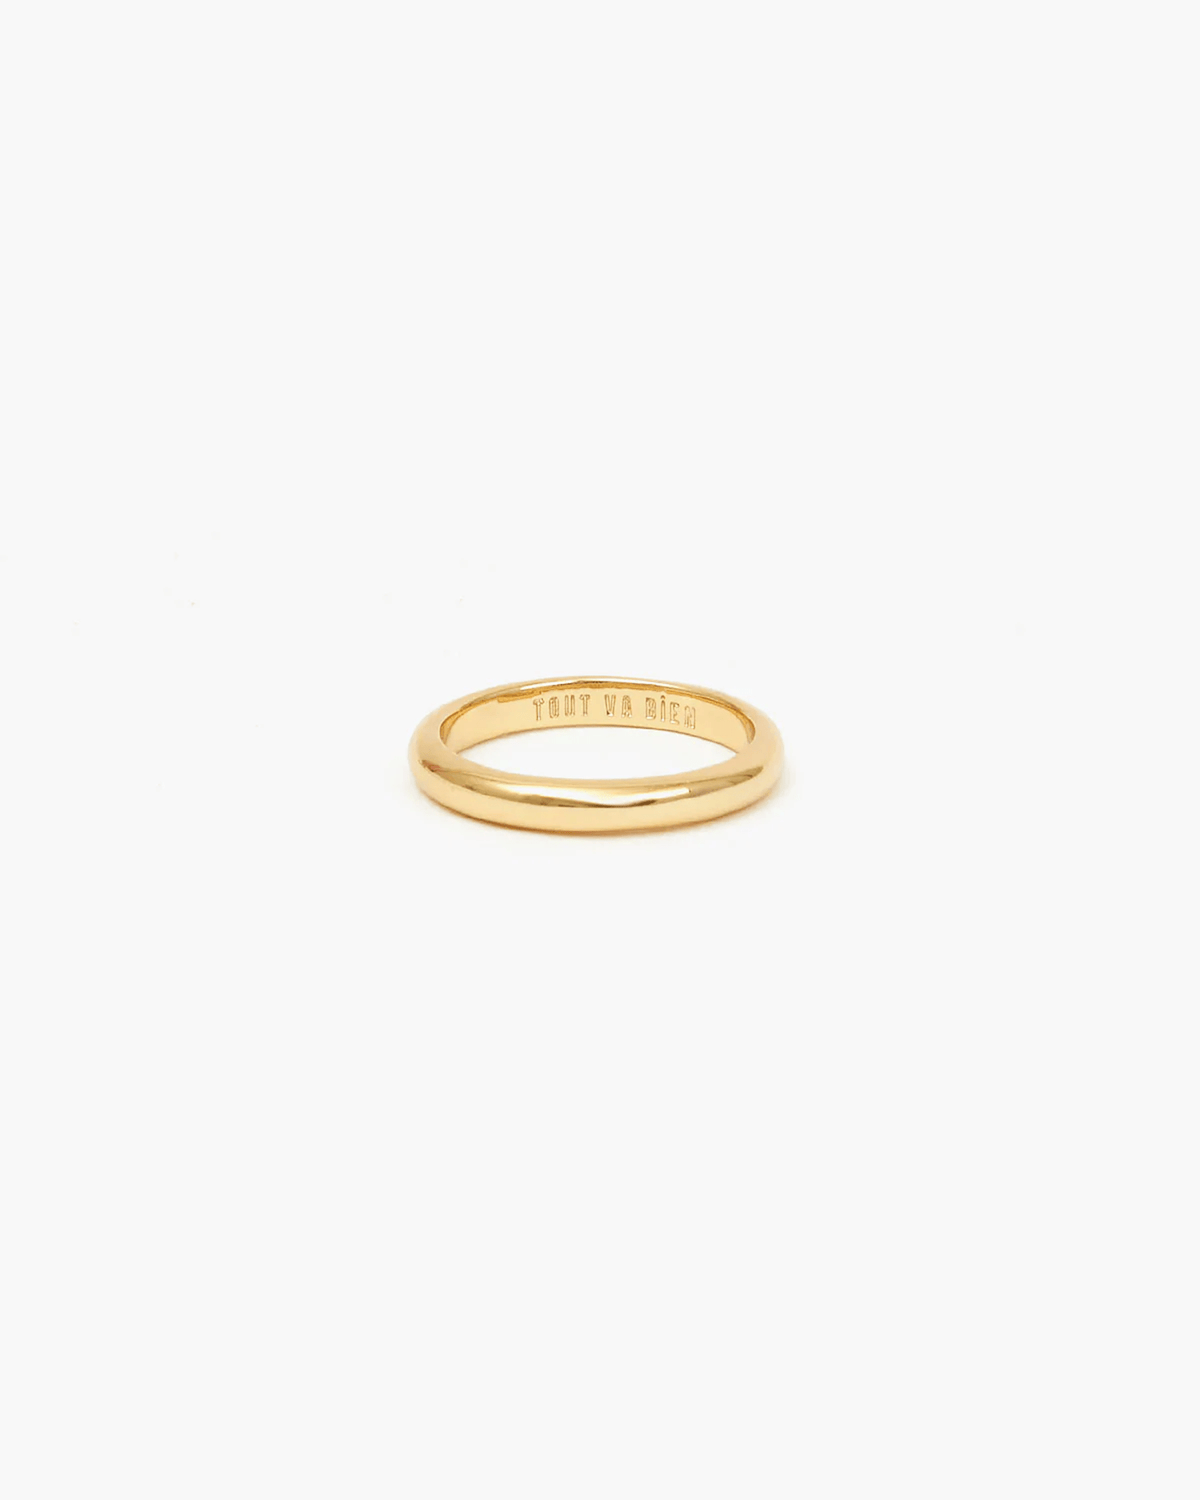 Clare V. Jewelry Stacking Ring in Gold